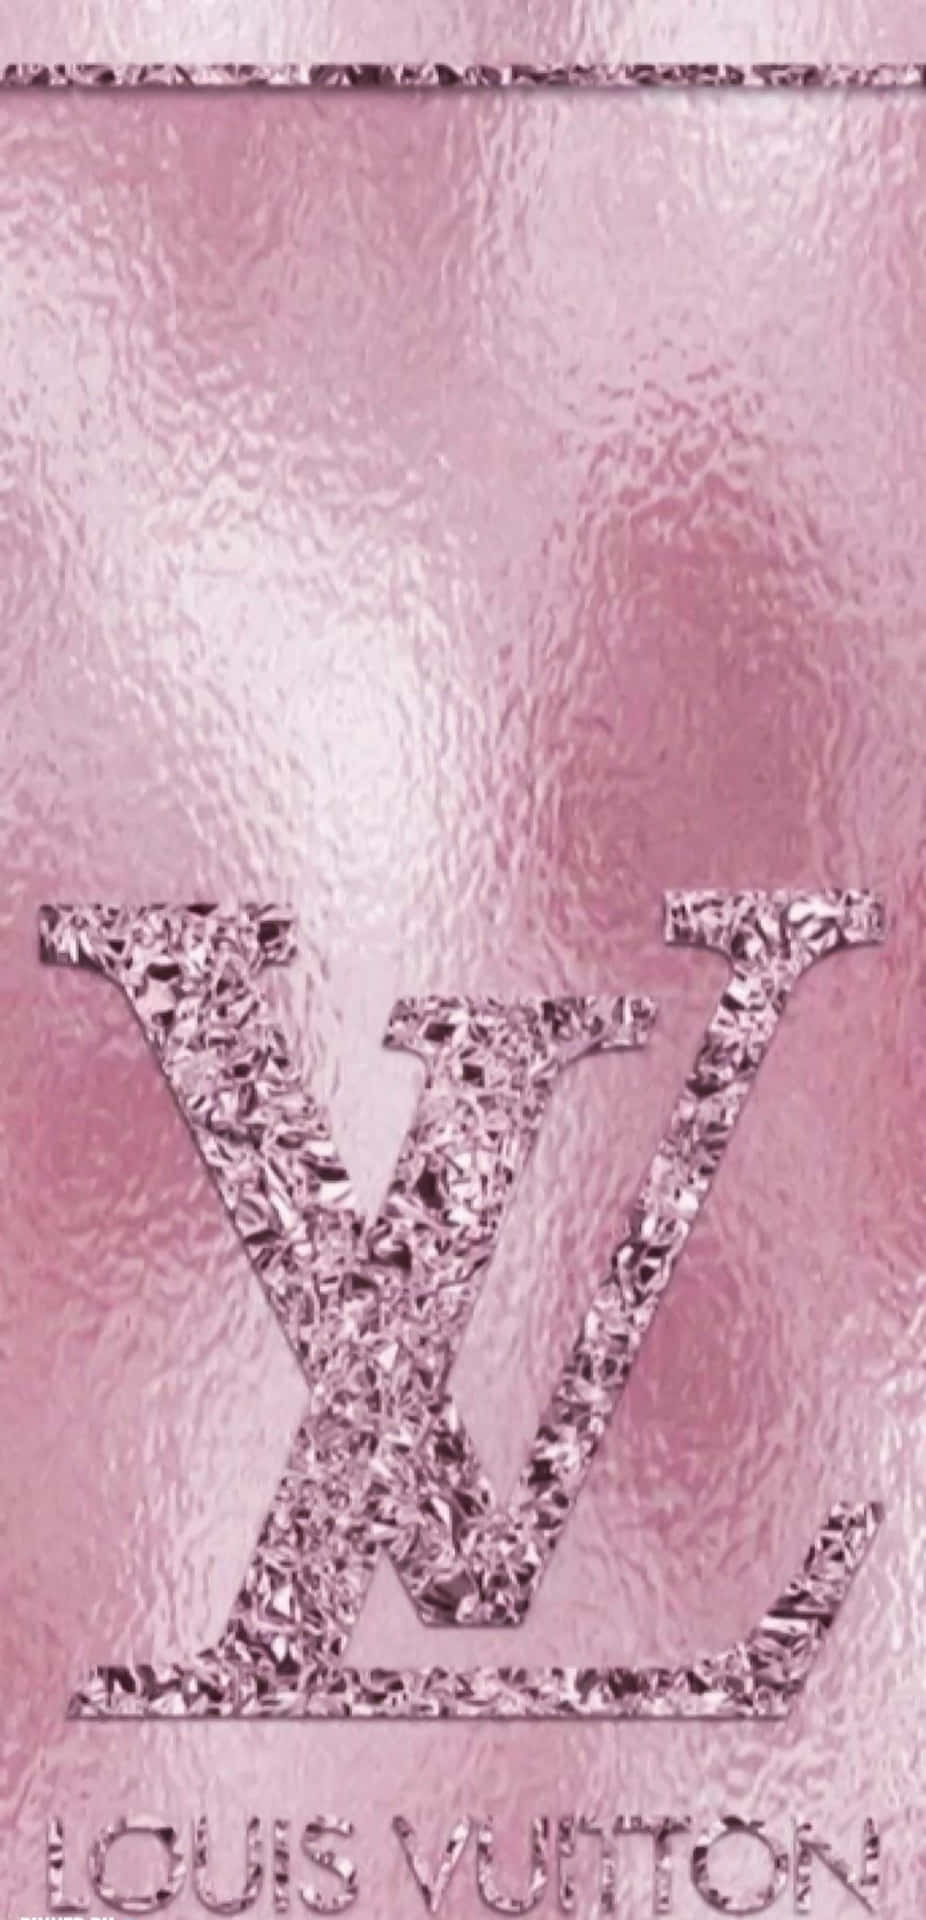 Louis Vuitton (pink and white)  Pink wallpaper iphone, Butterfly wallpaper  iphone, Iphone wallpaper